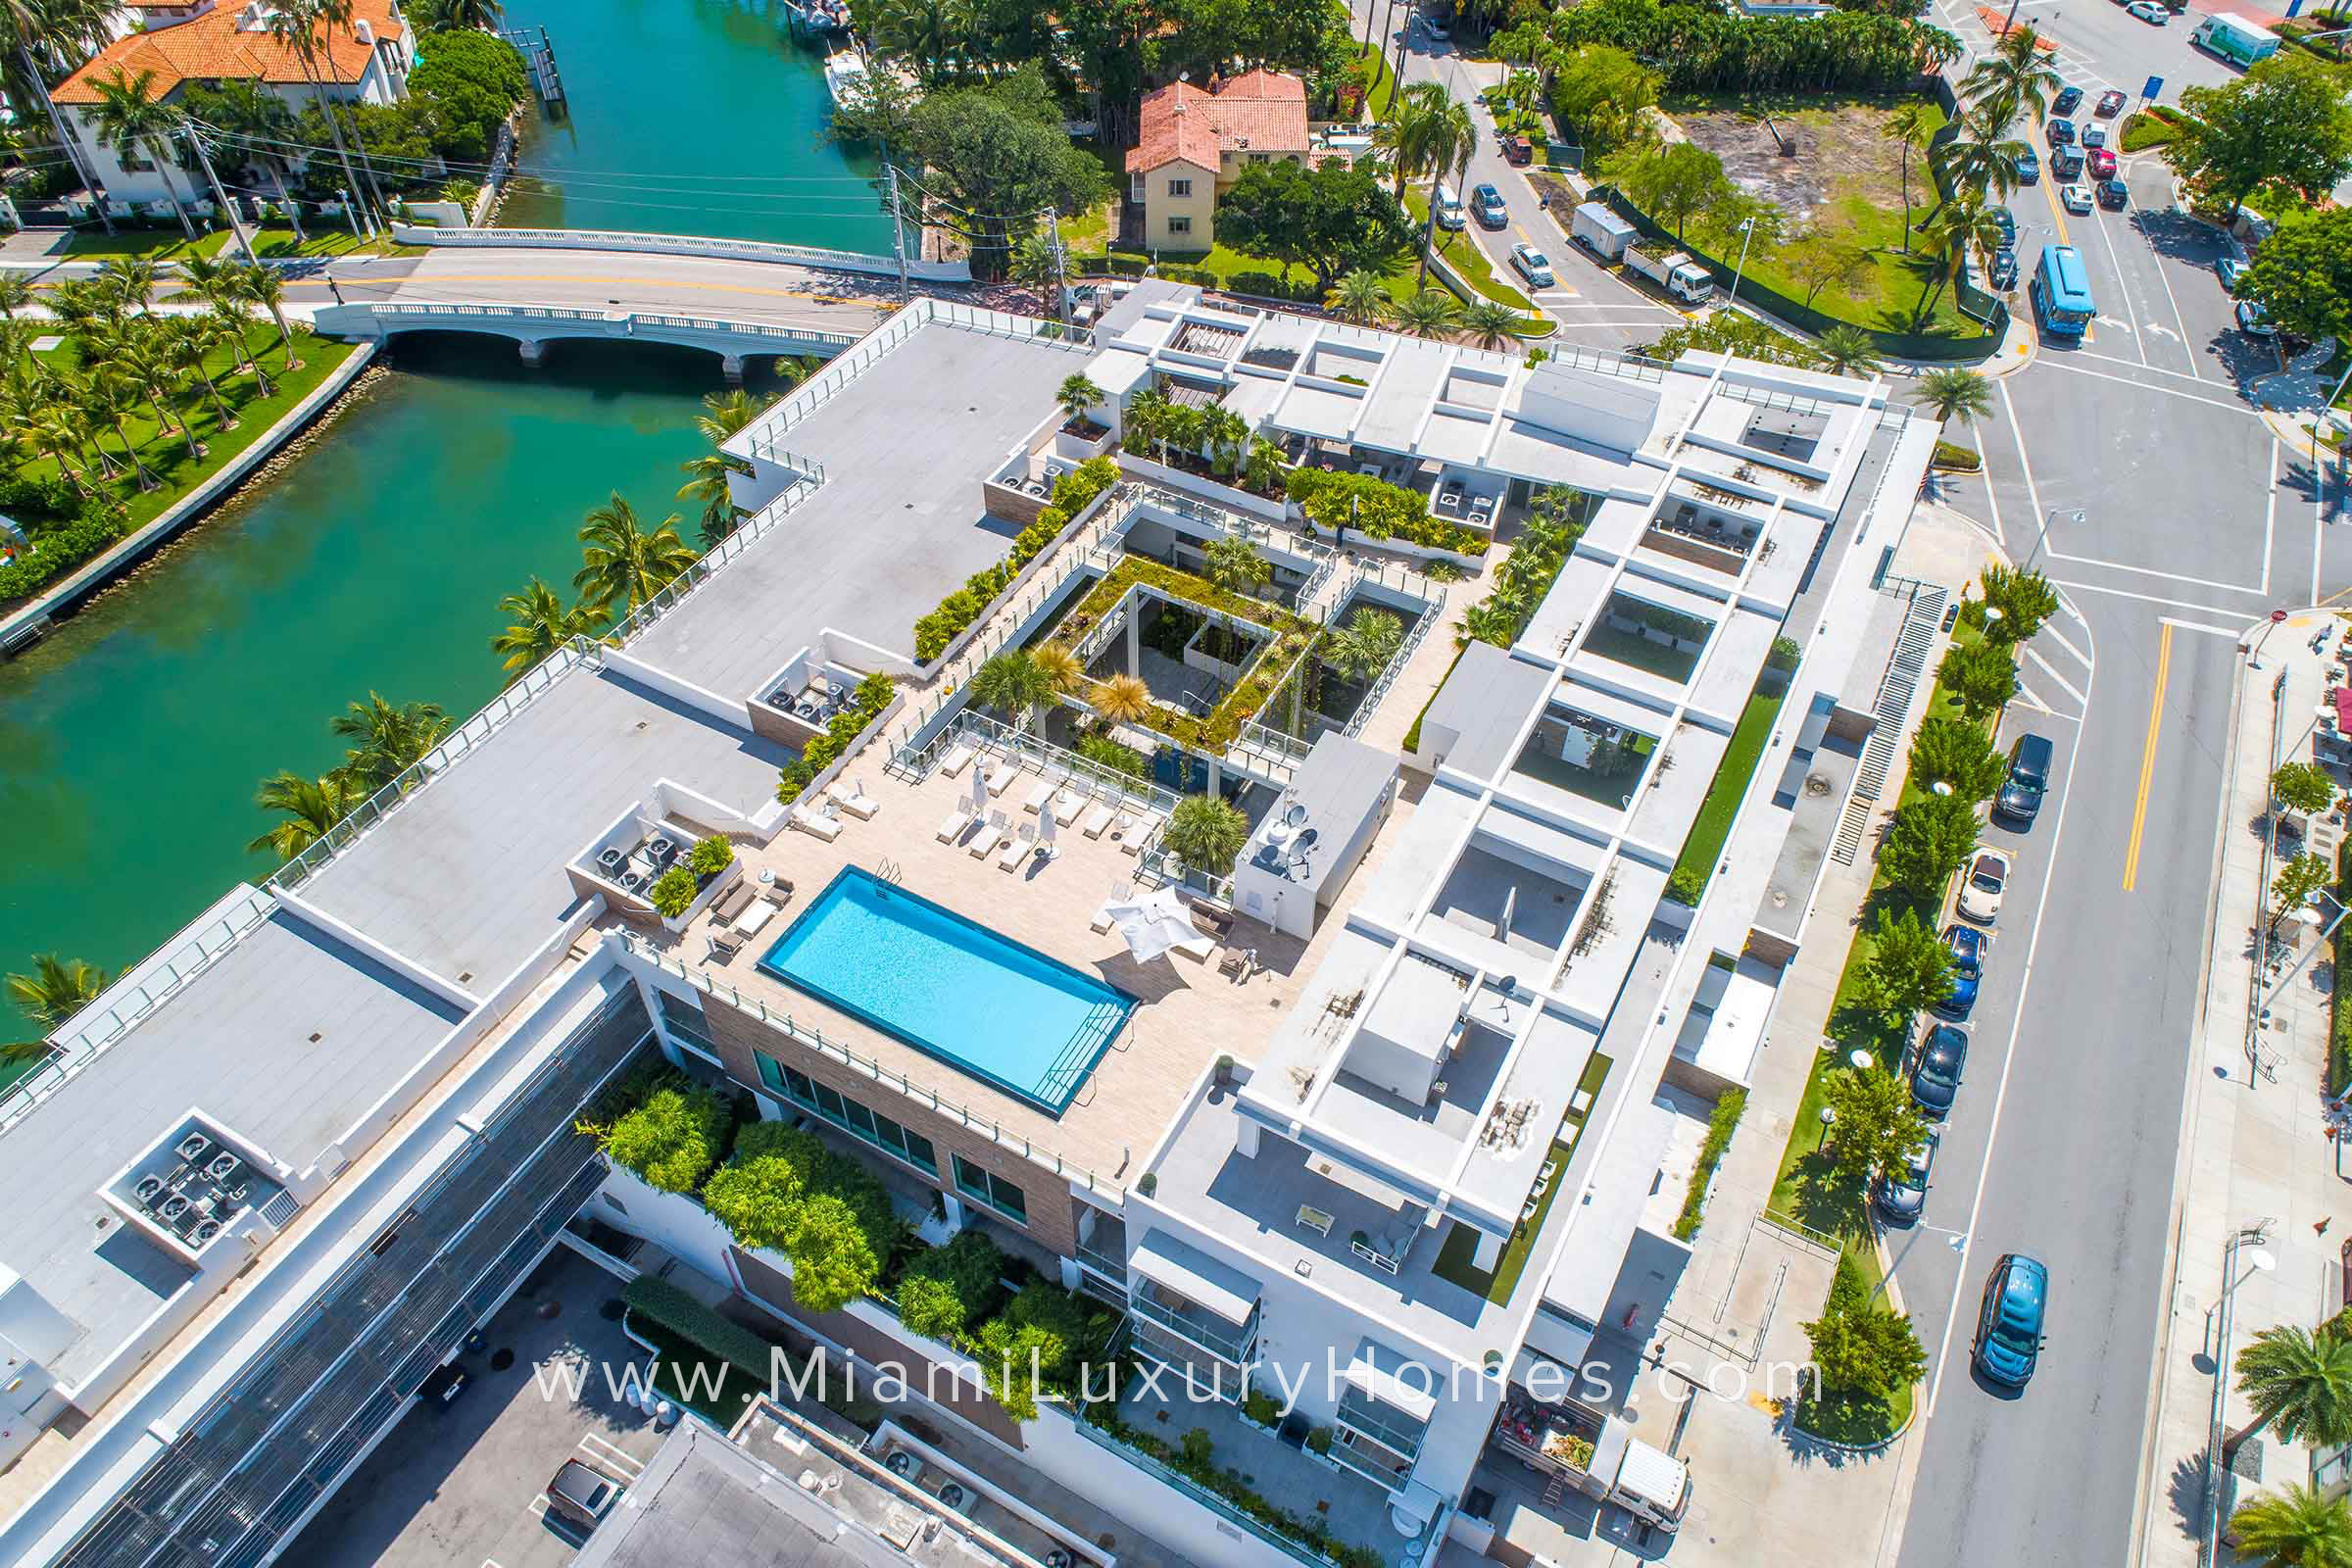 Aerial View of Palau Sunset Harbour Condo Building